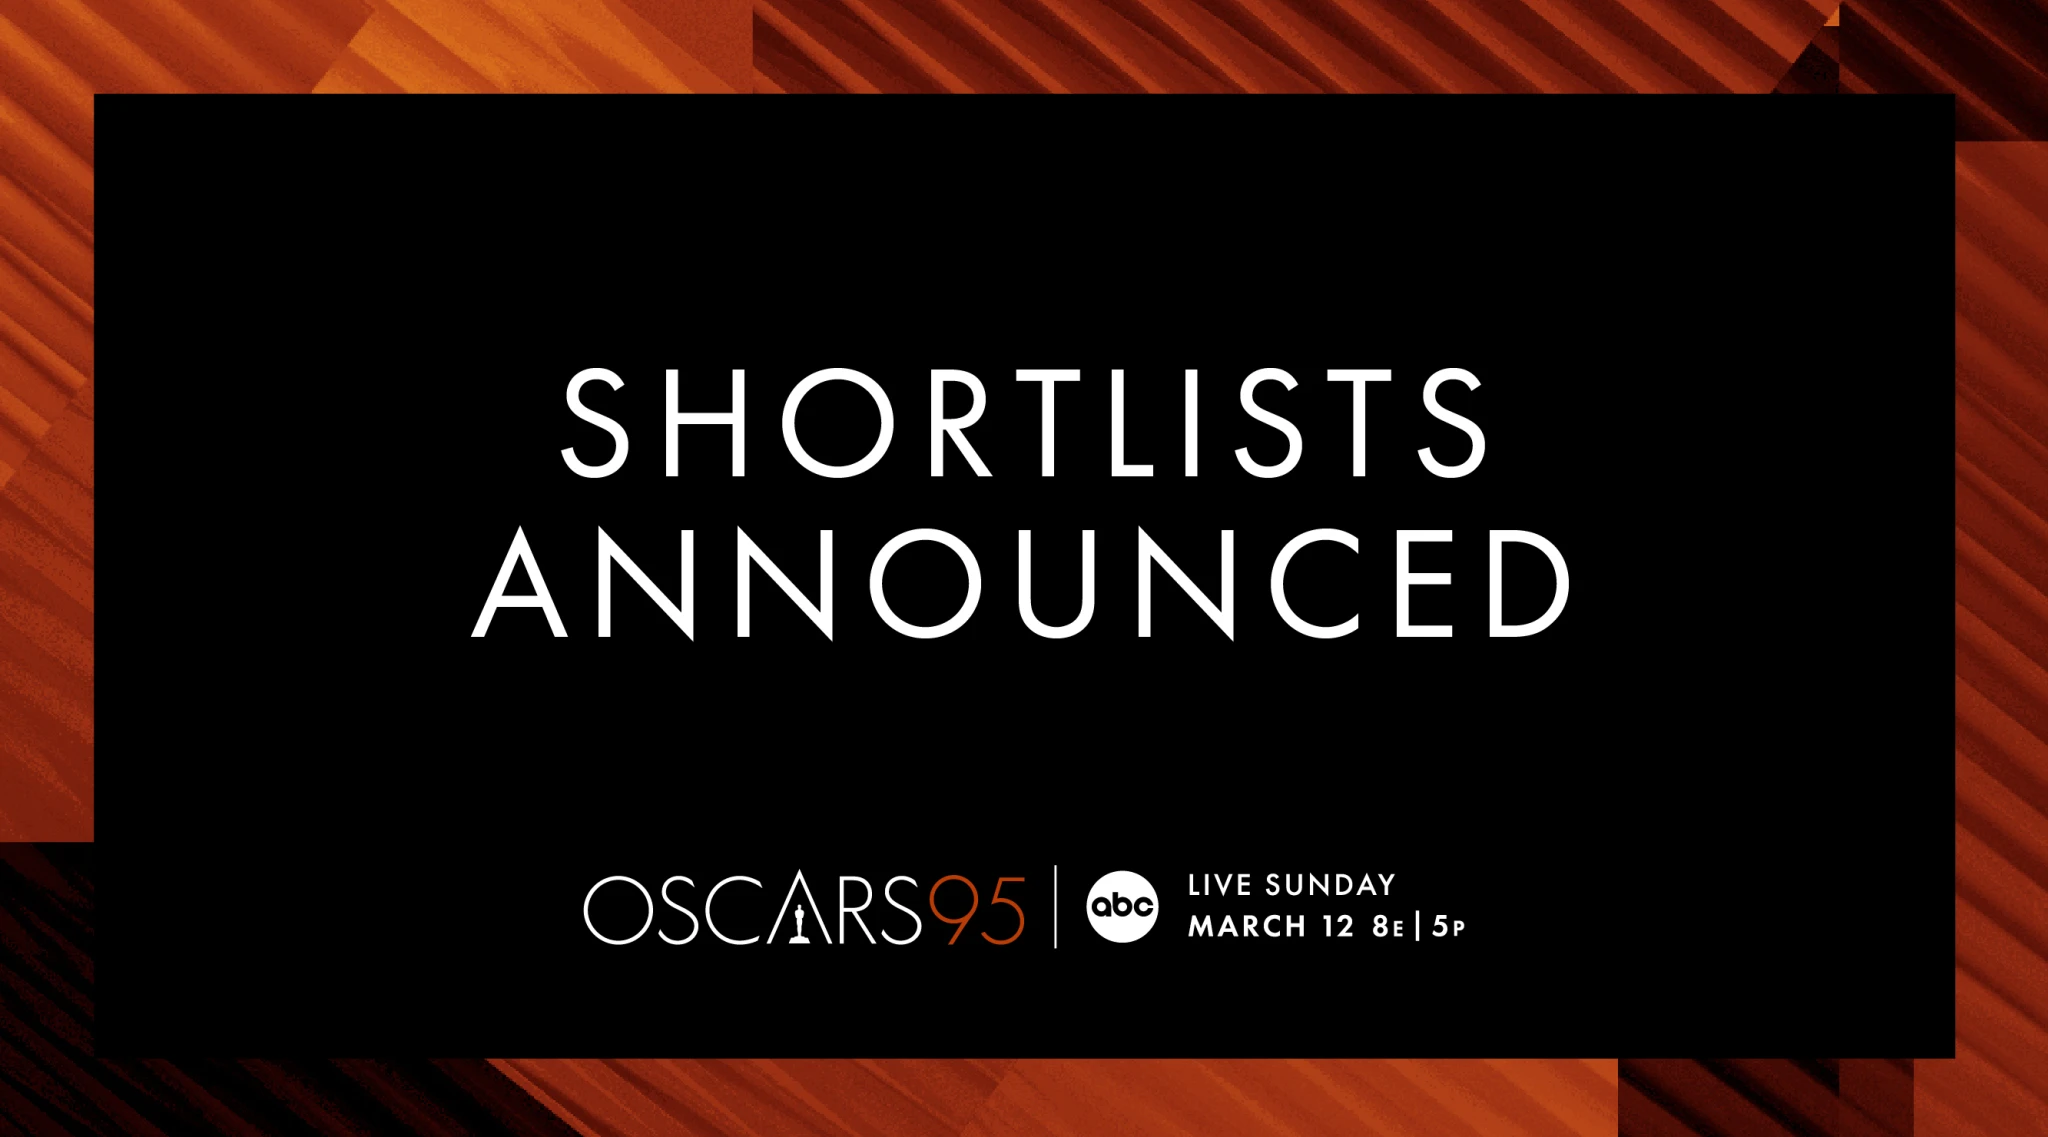 95th Oscars Shortlists Announced for 10 Categories